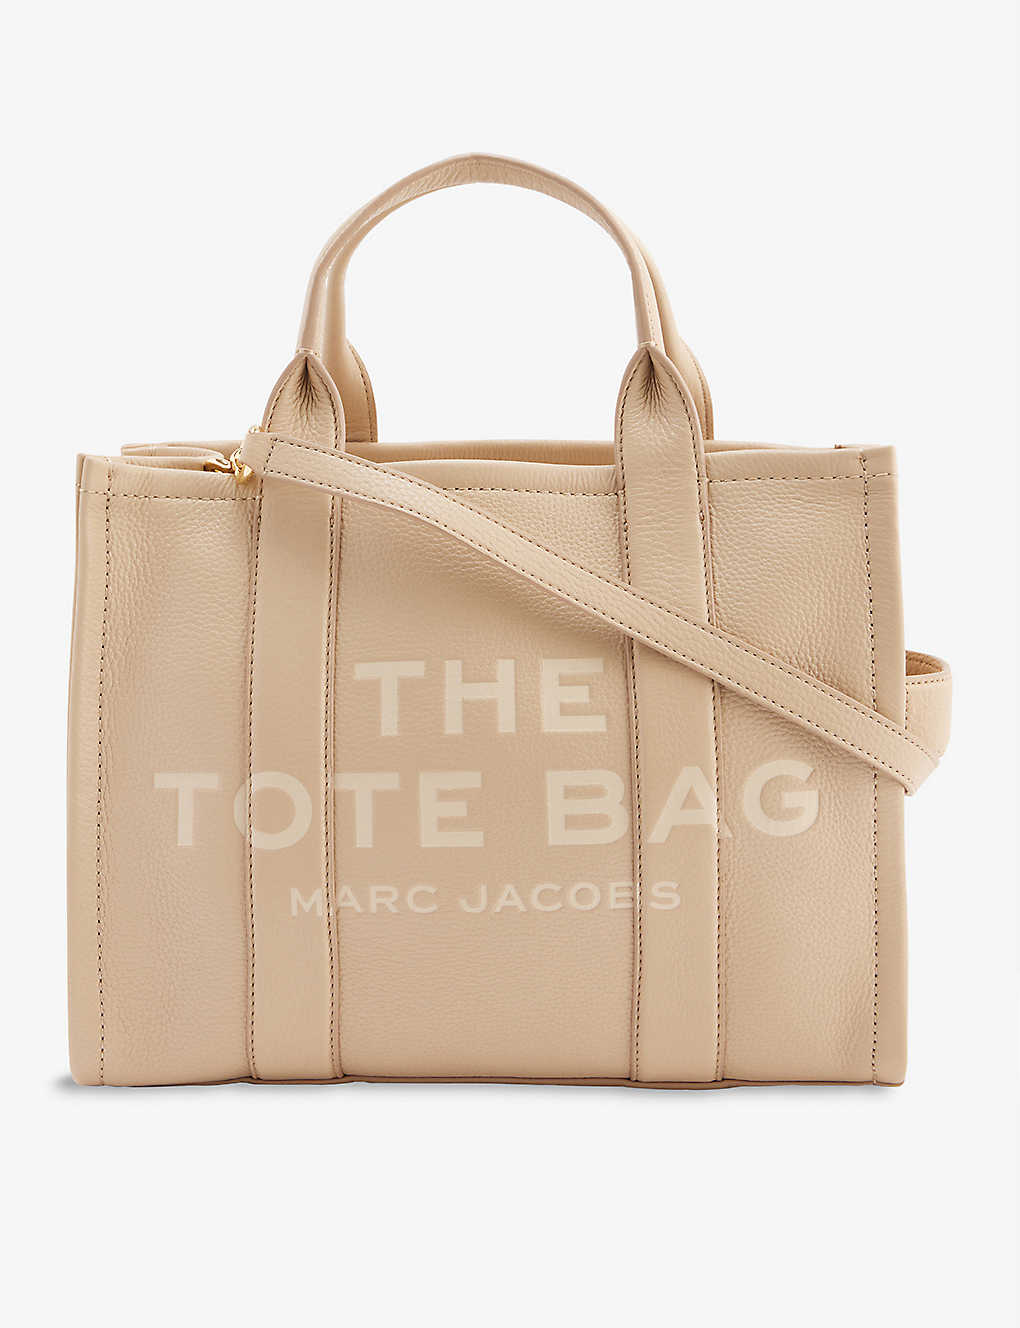 MARC JACOBS The Tote small leather tote bag